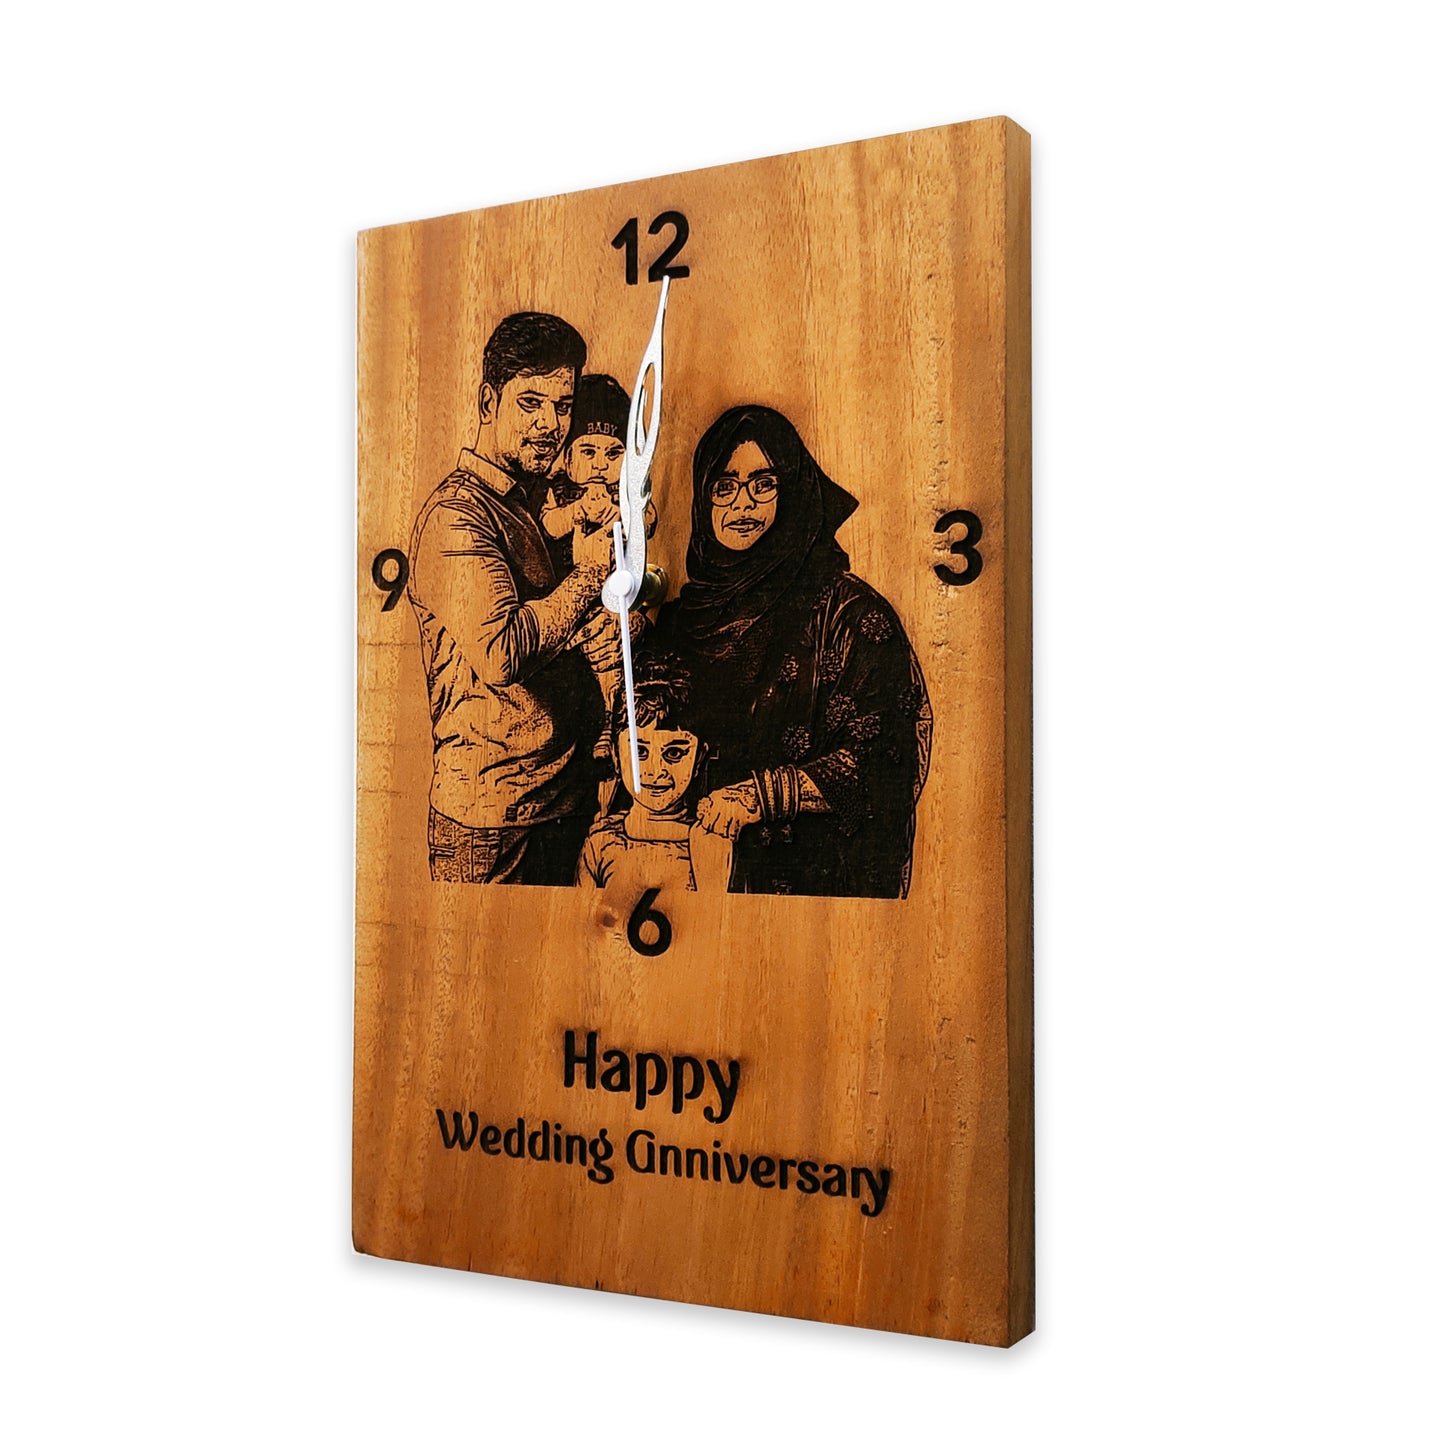 Personalized Photo Engraved Wooden Wall Clock